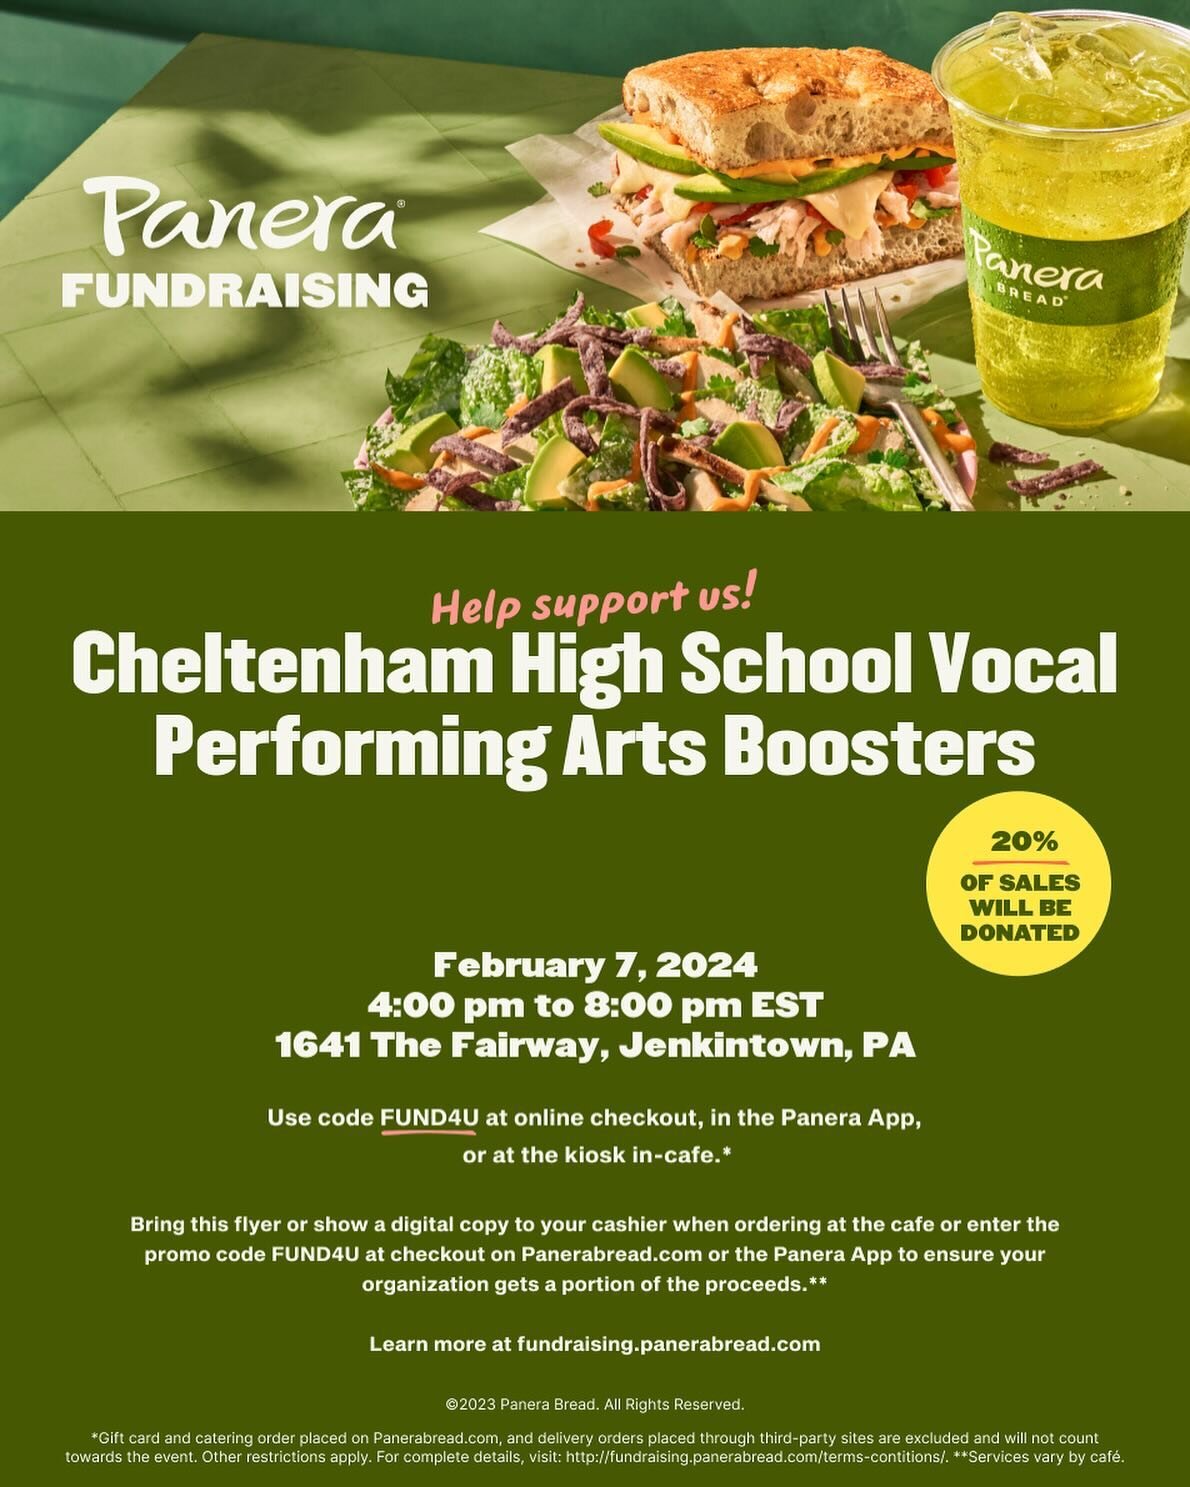 Come support the Vocal Arts Program by heading out to Panera tomorrow from 4-8 pm!!!